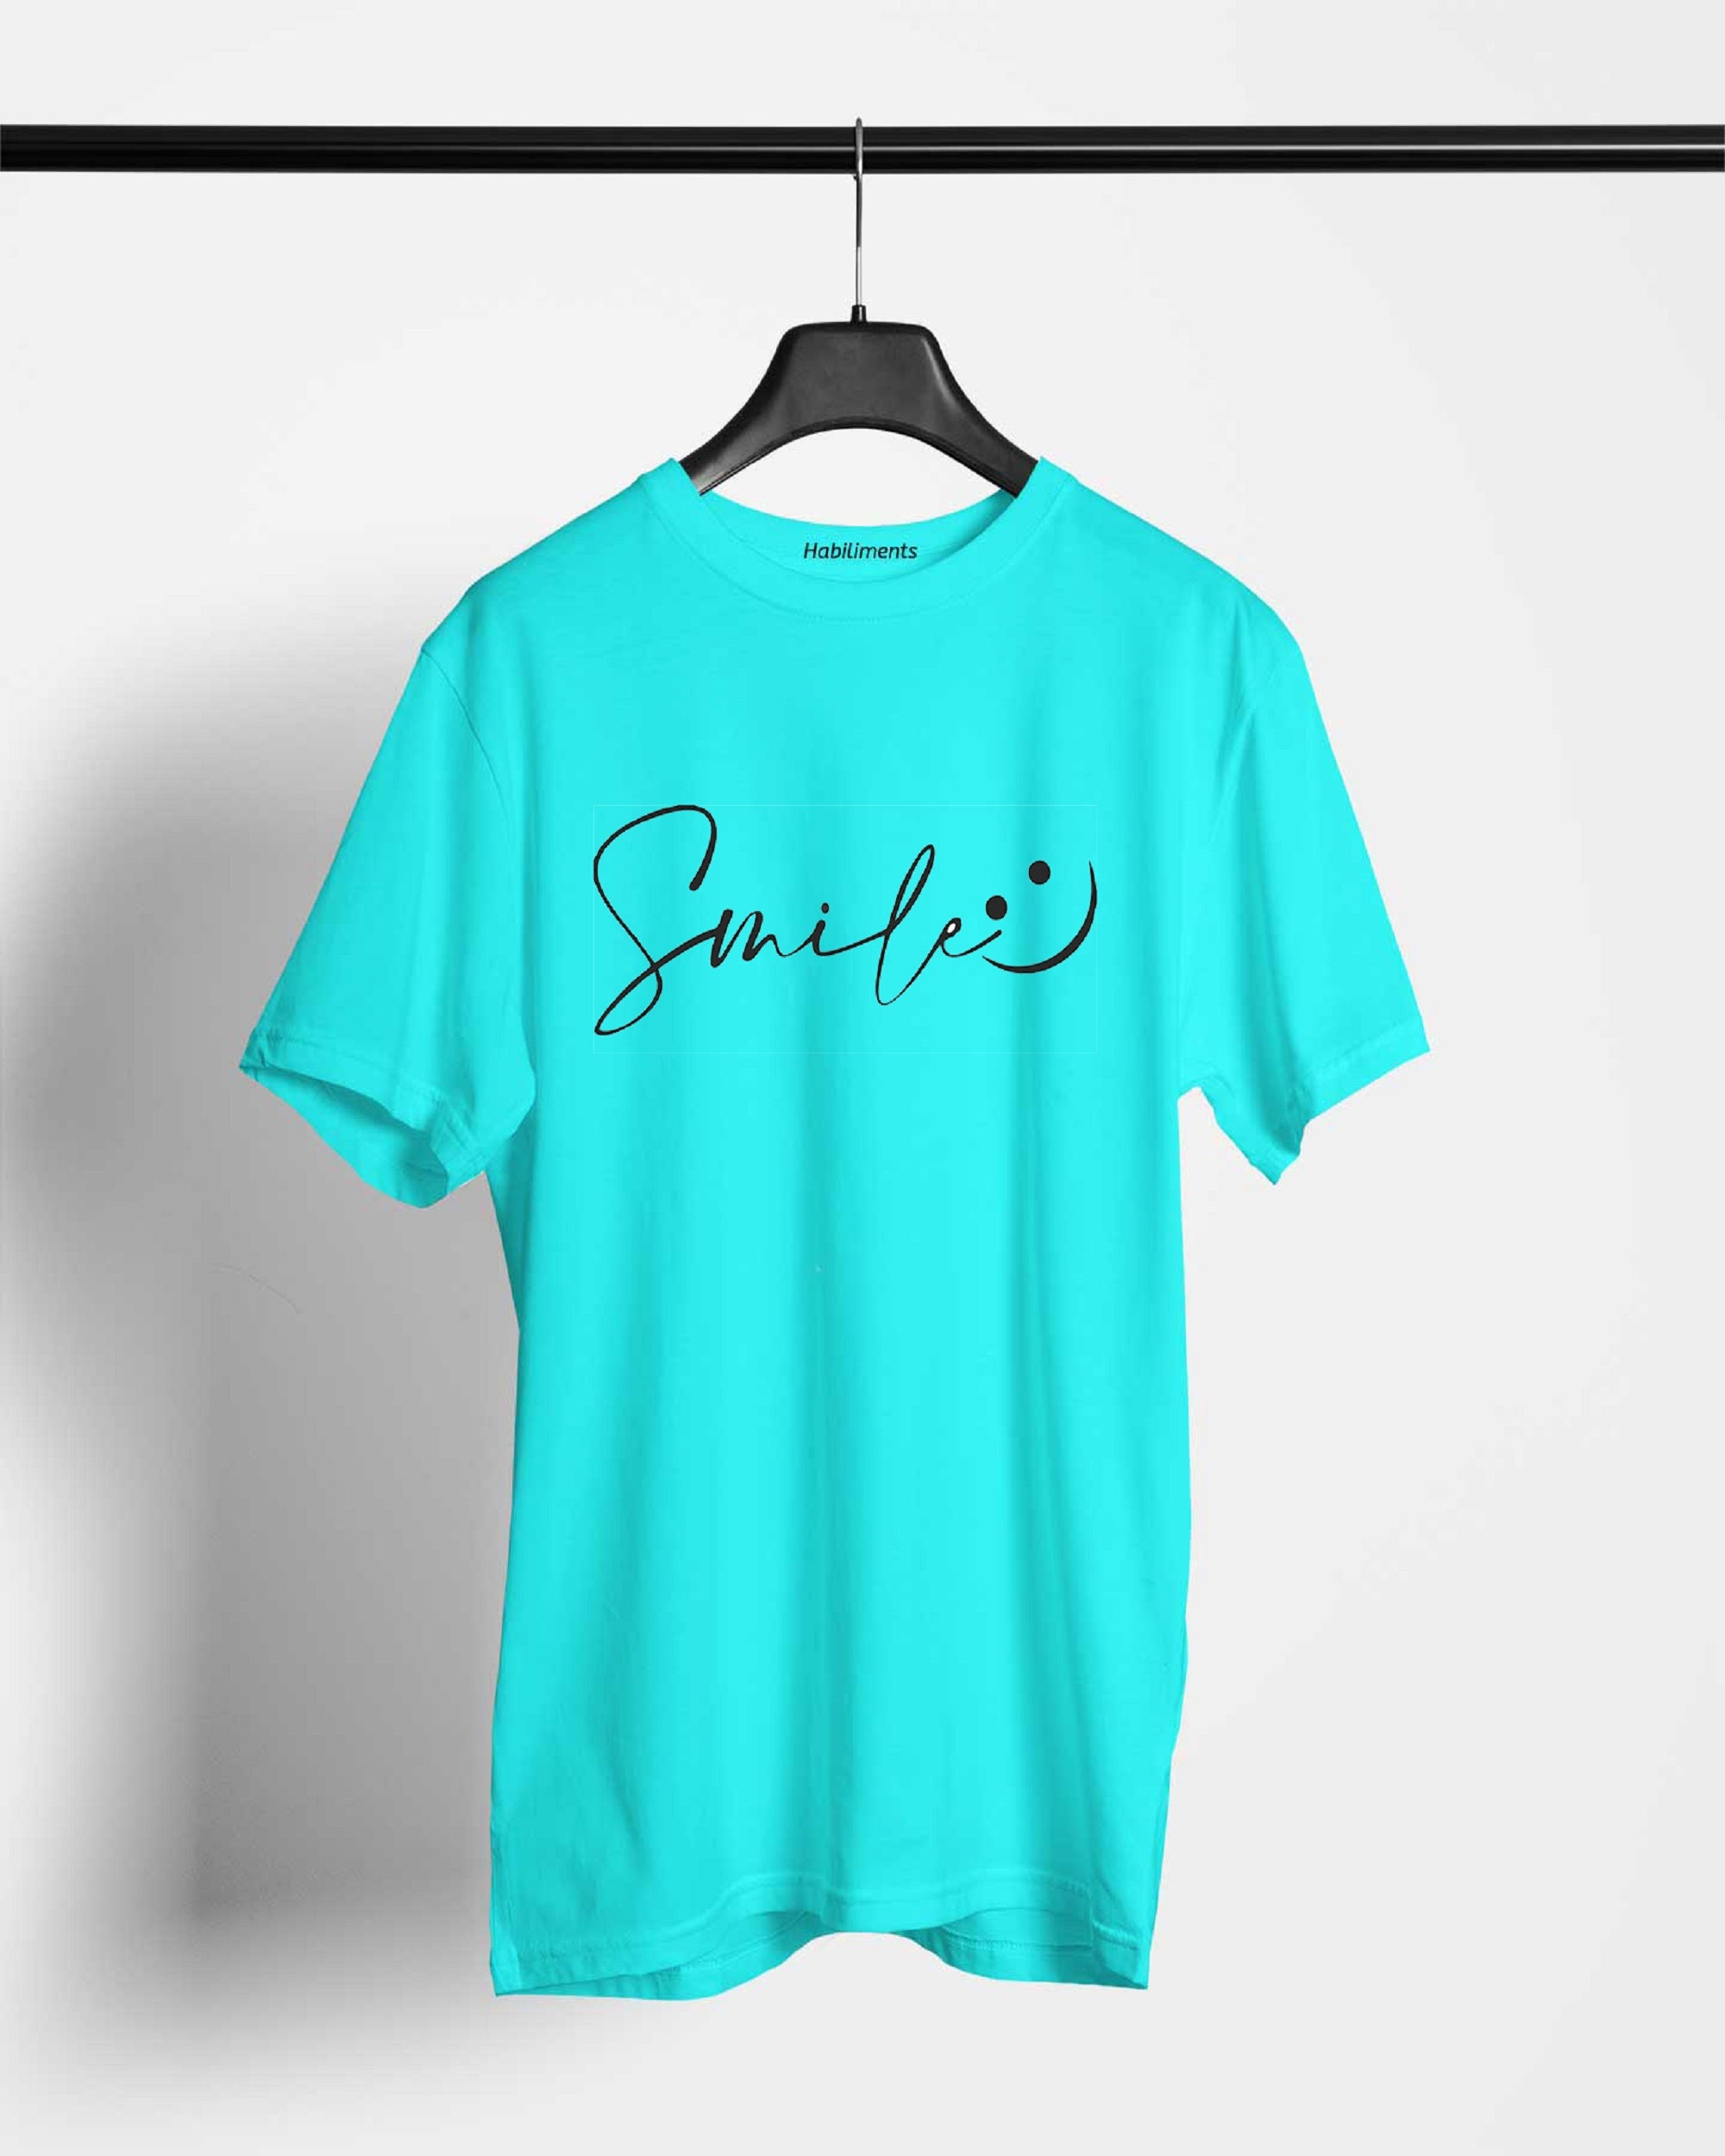 Smily New T-Shirts For Men || Sky Blue || Stylish Tshirts || 100% Cotton || Best T-Shirt For Men's